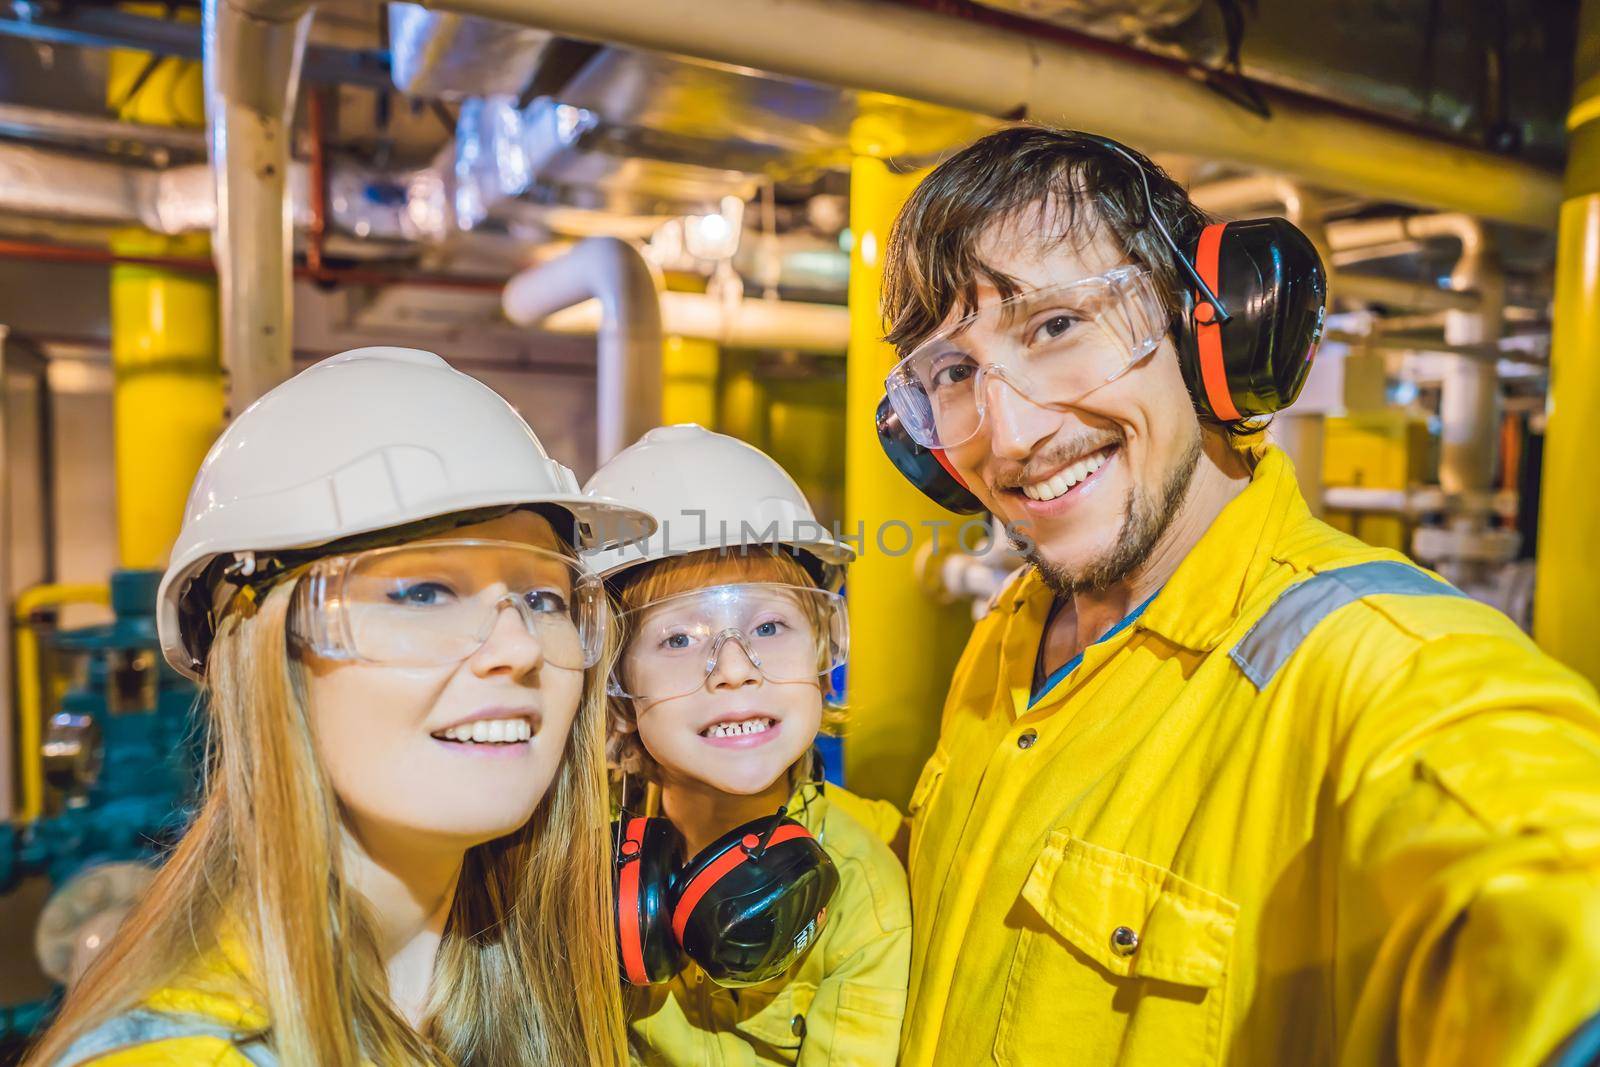 Mom, Dad and Son in a yellow work uniform, glasses, and helmet in an industrial environment, oil Platform or liquefied gas plant.